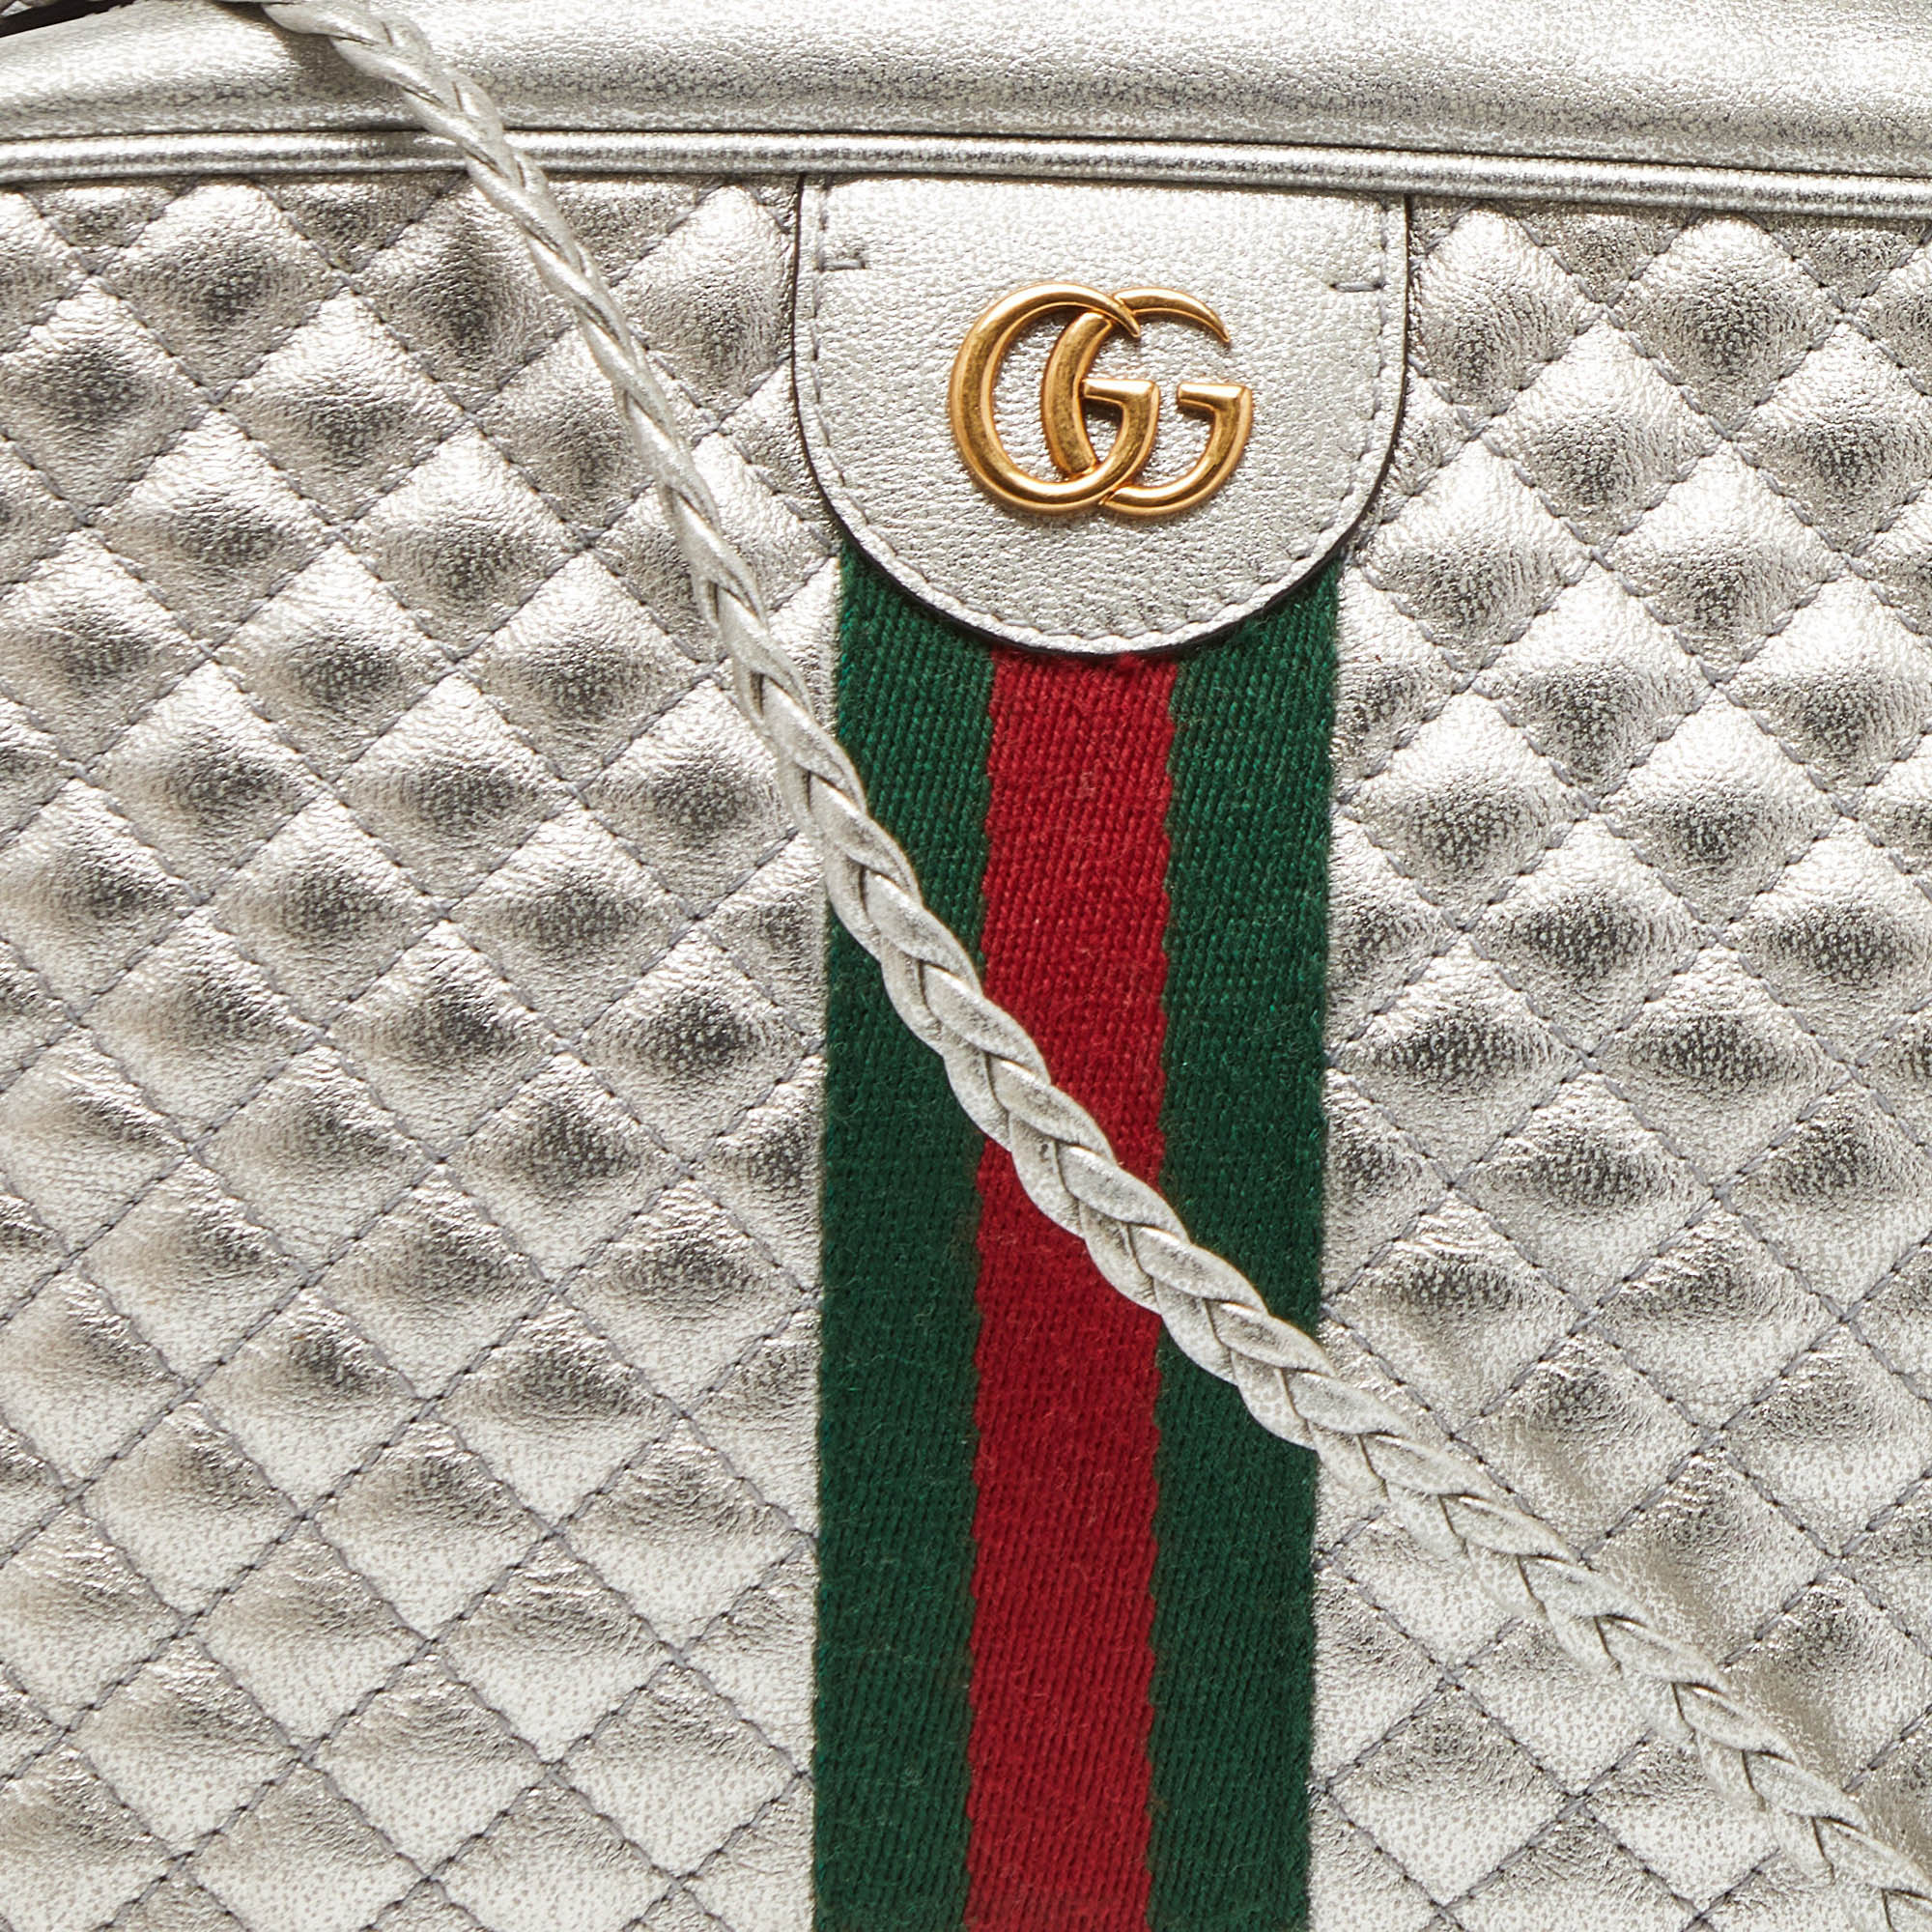 Gucci Silver Quilted Leather Small Trapuntata Shoulder Bag